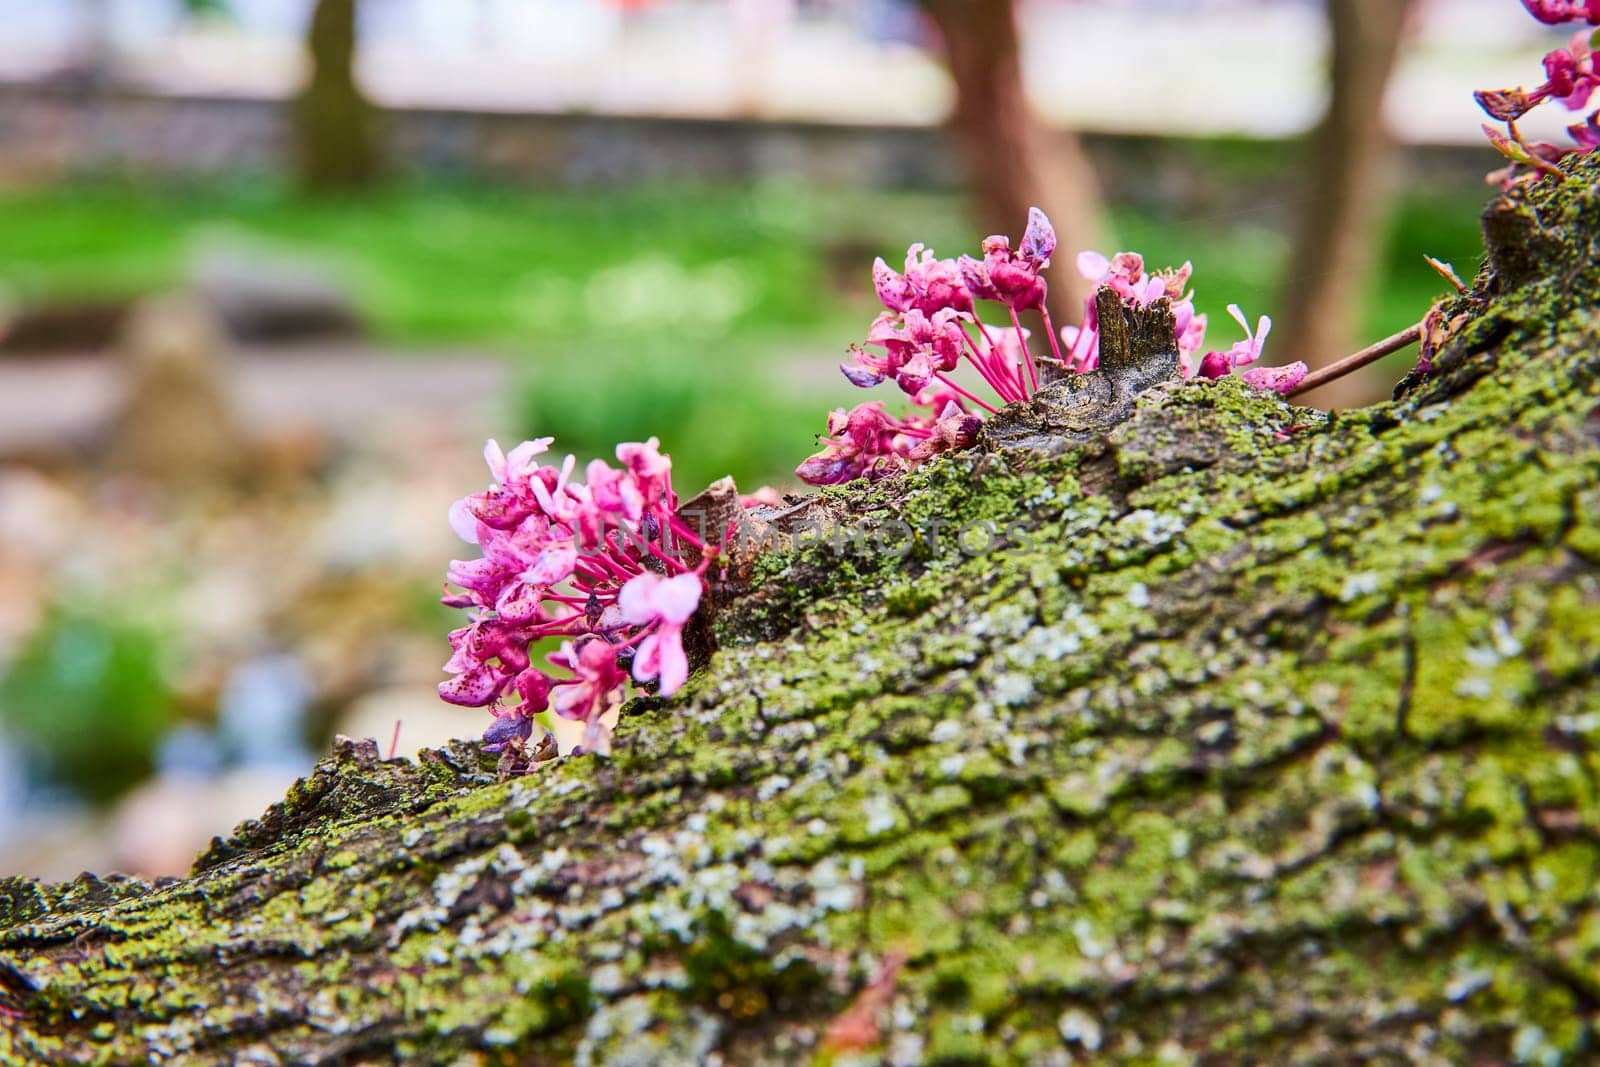 Vibrant pink flowers bloom on mossy tree bark in Warsaw Biblical Gardens, embodying nature's resilience.